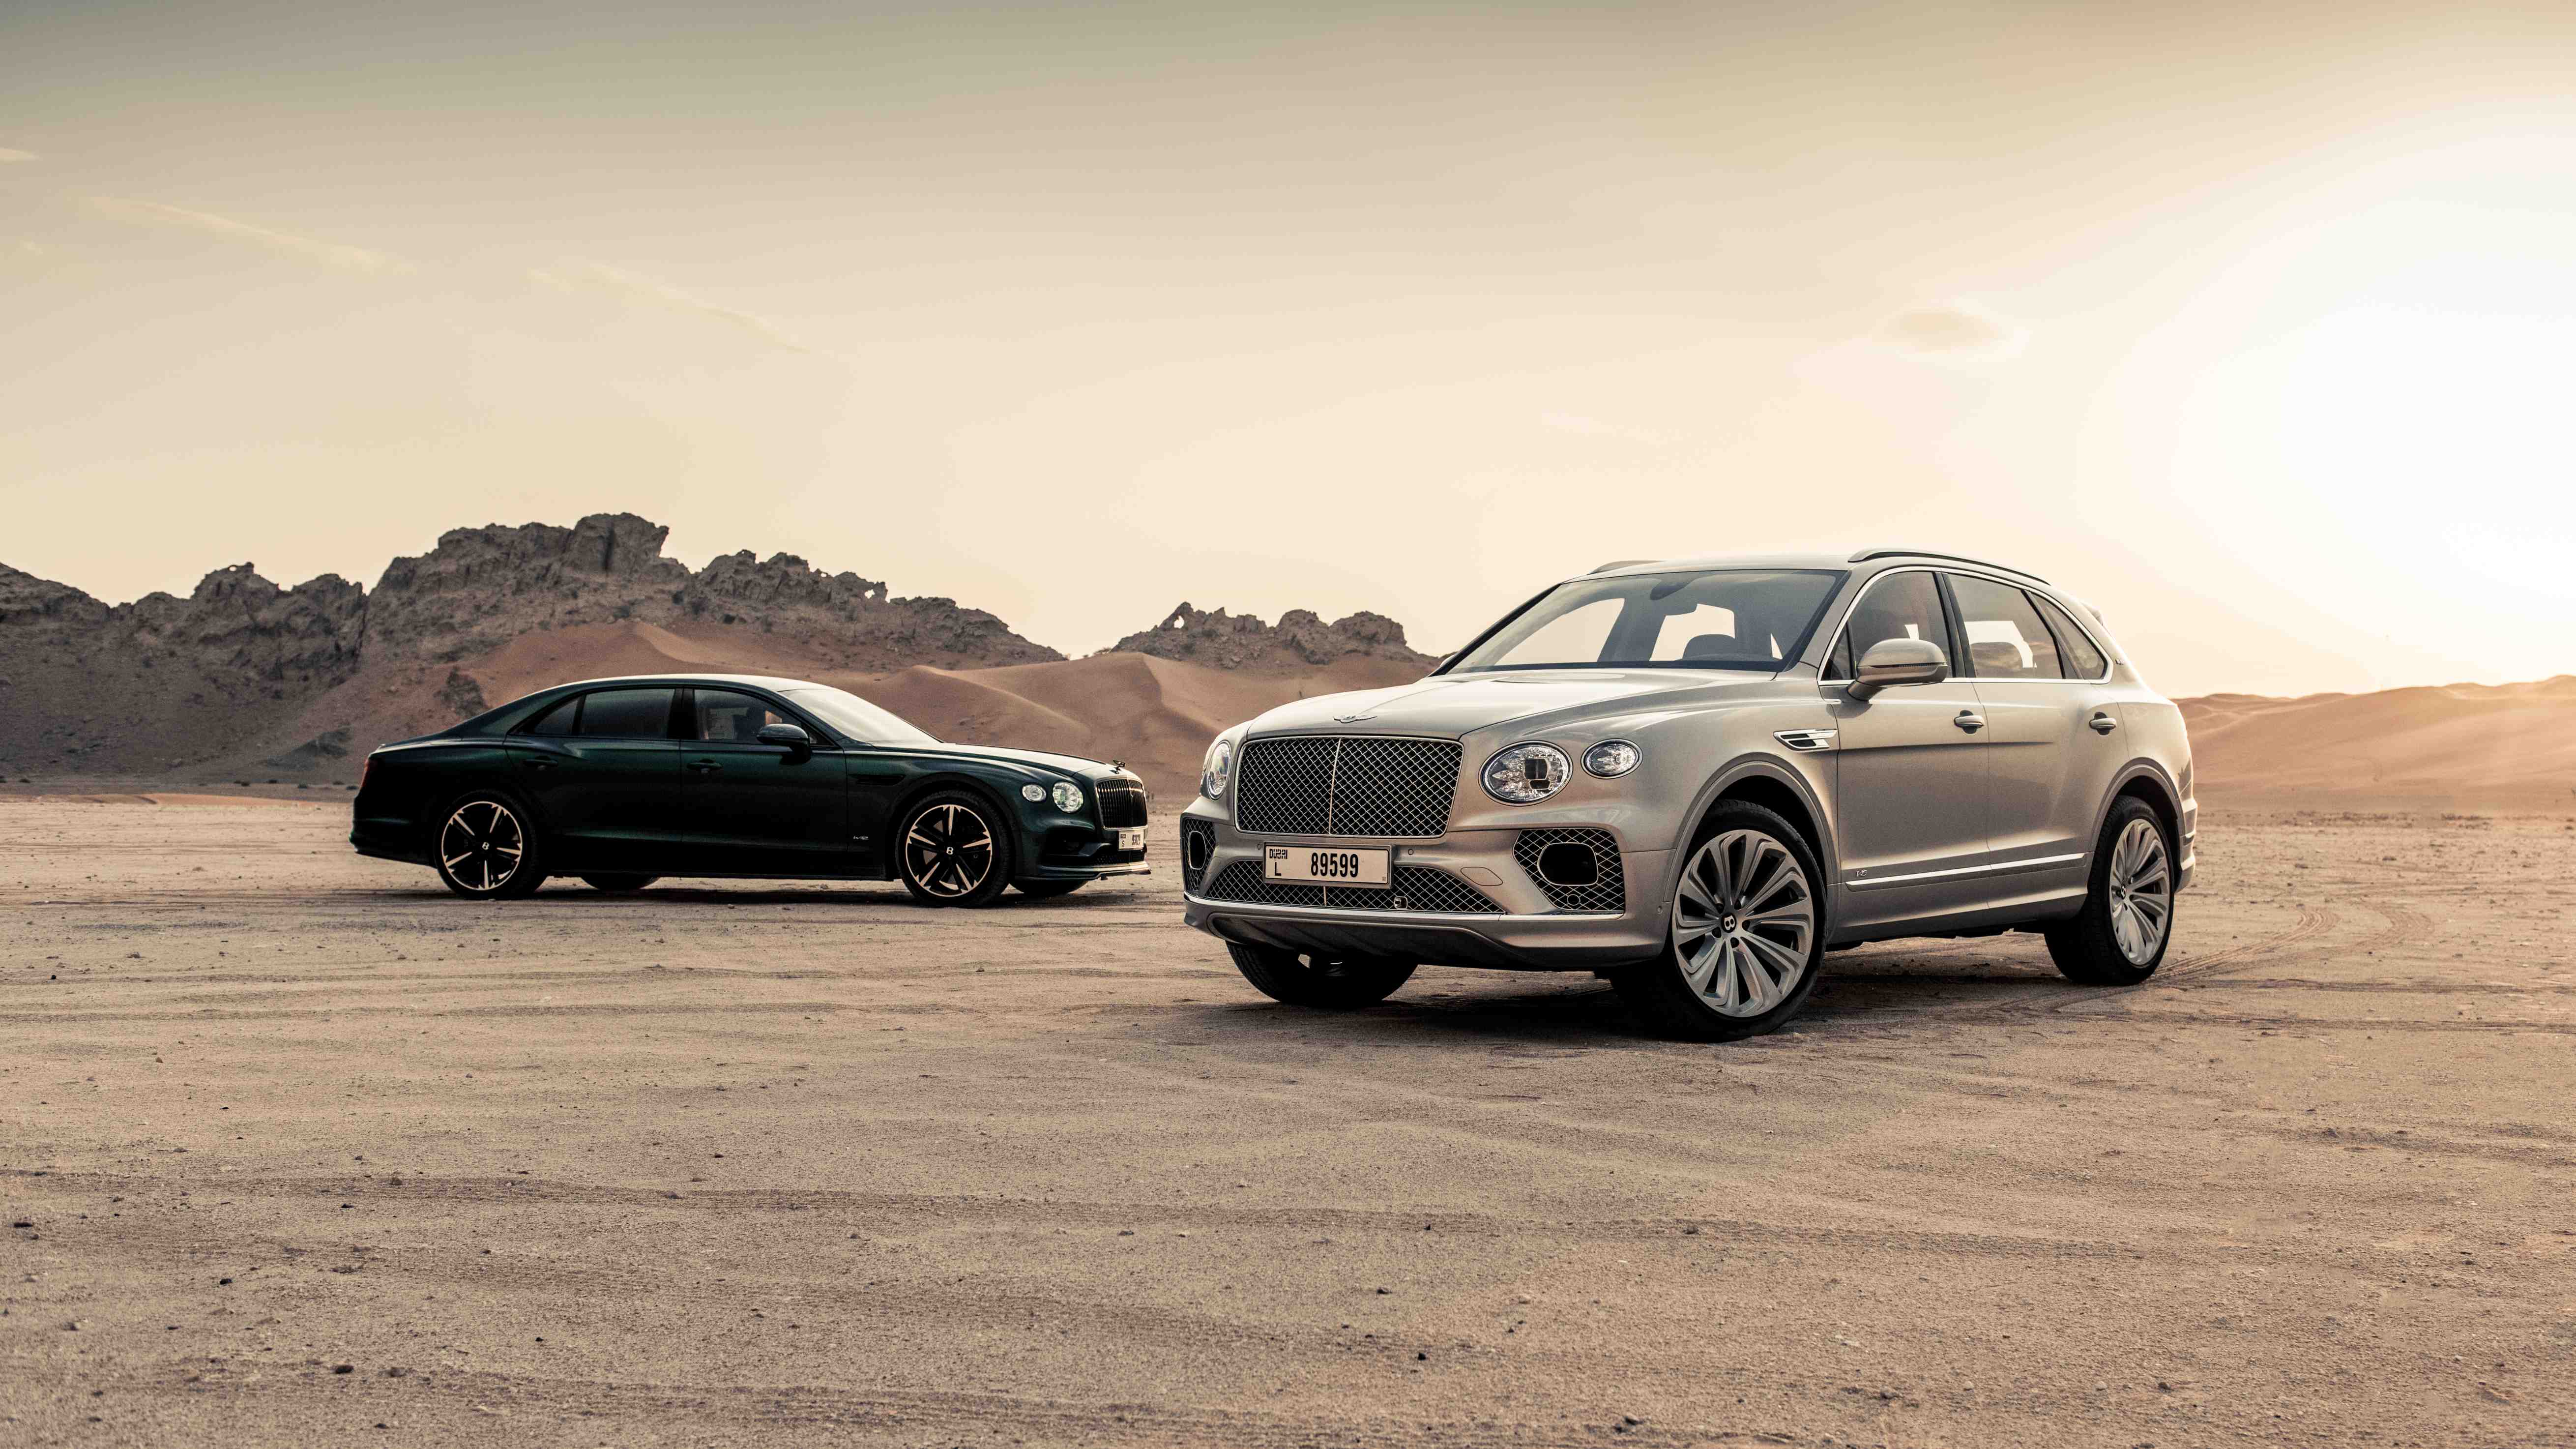 Bentley Charges To Record Year With Unprecedented Demand For Luxury Hybrid Models